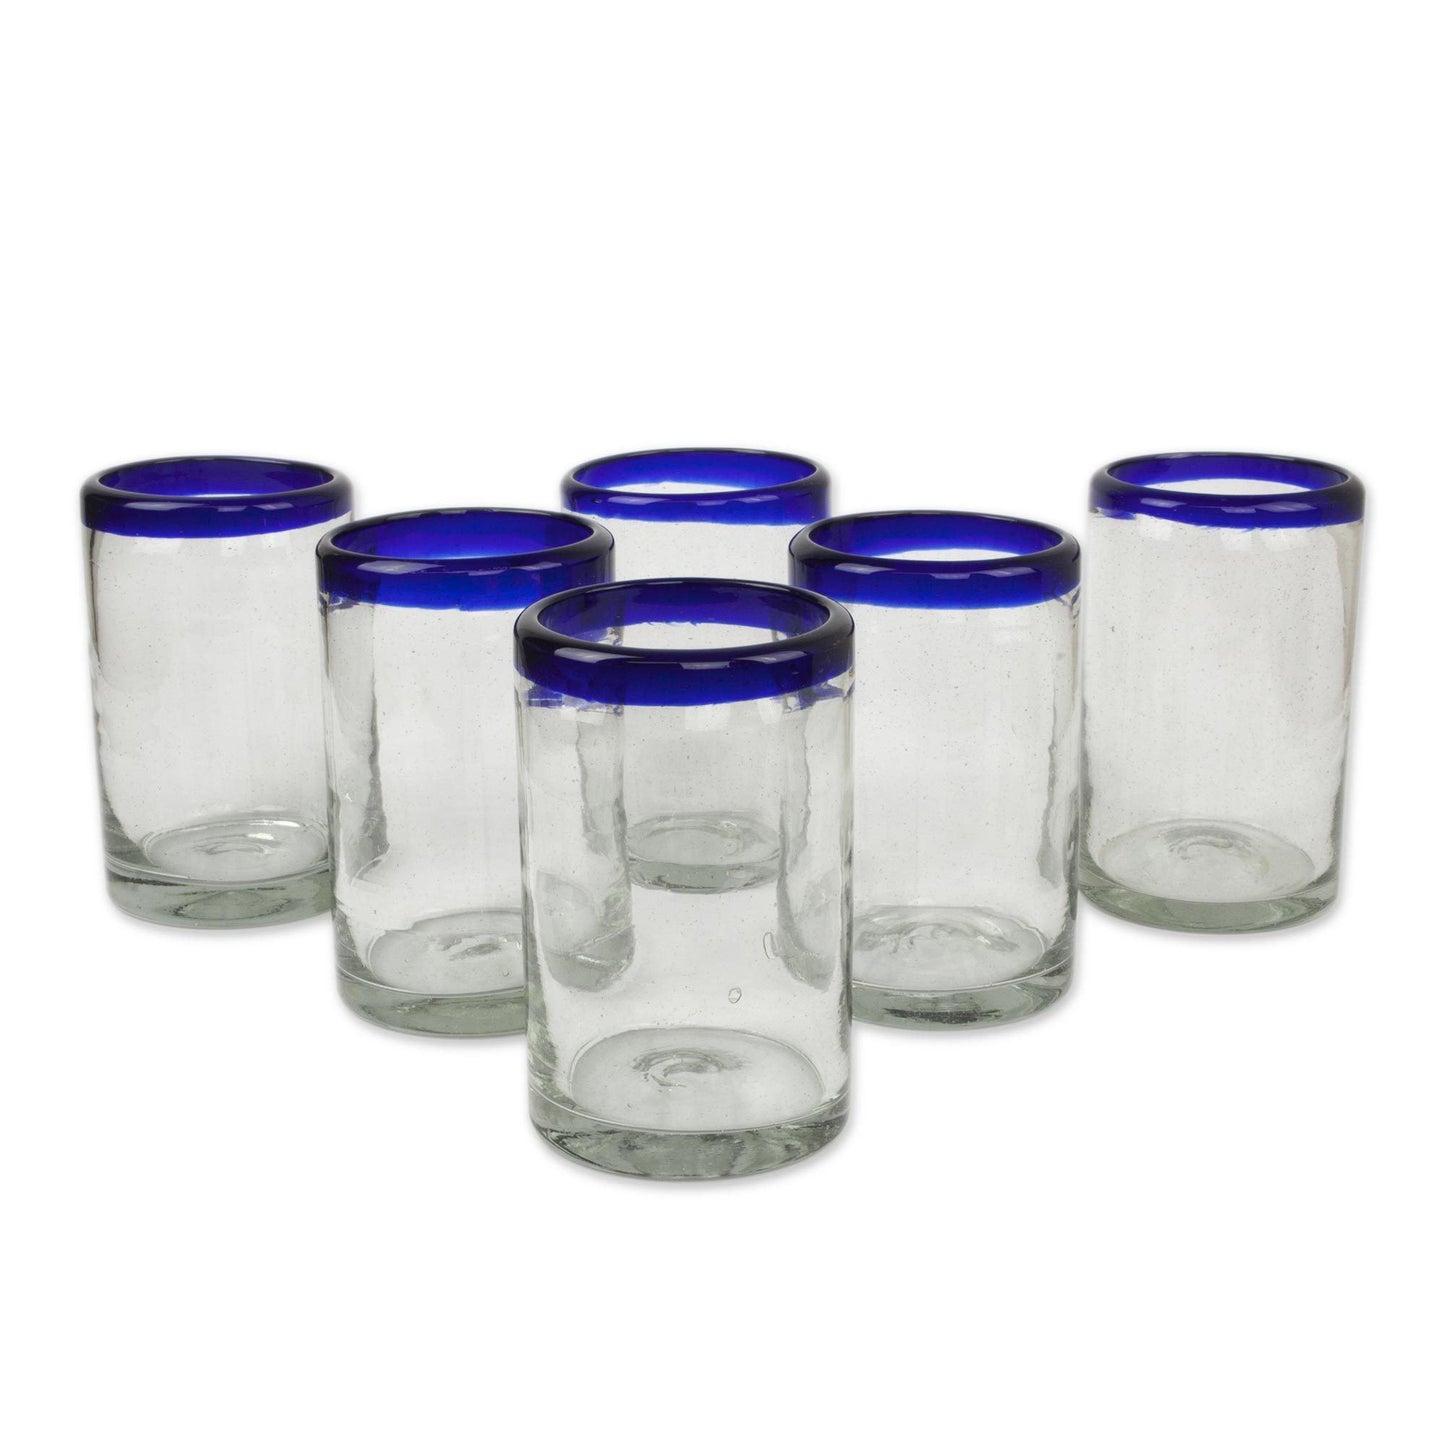 Artisan Crafted Juice Glasses - Set of 6